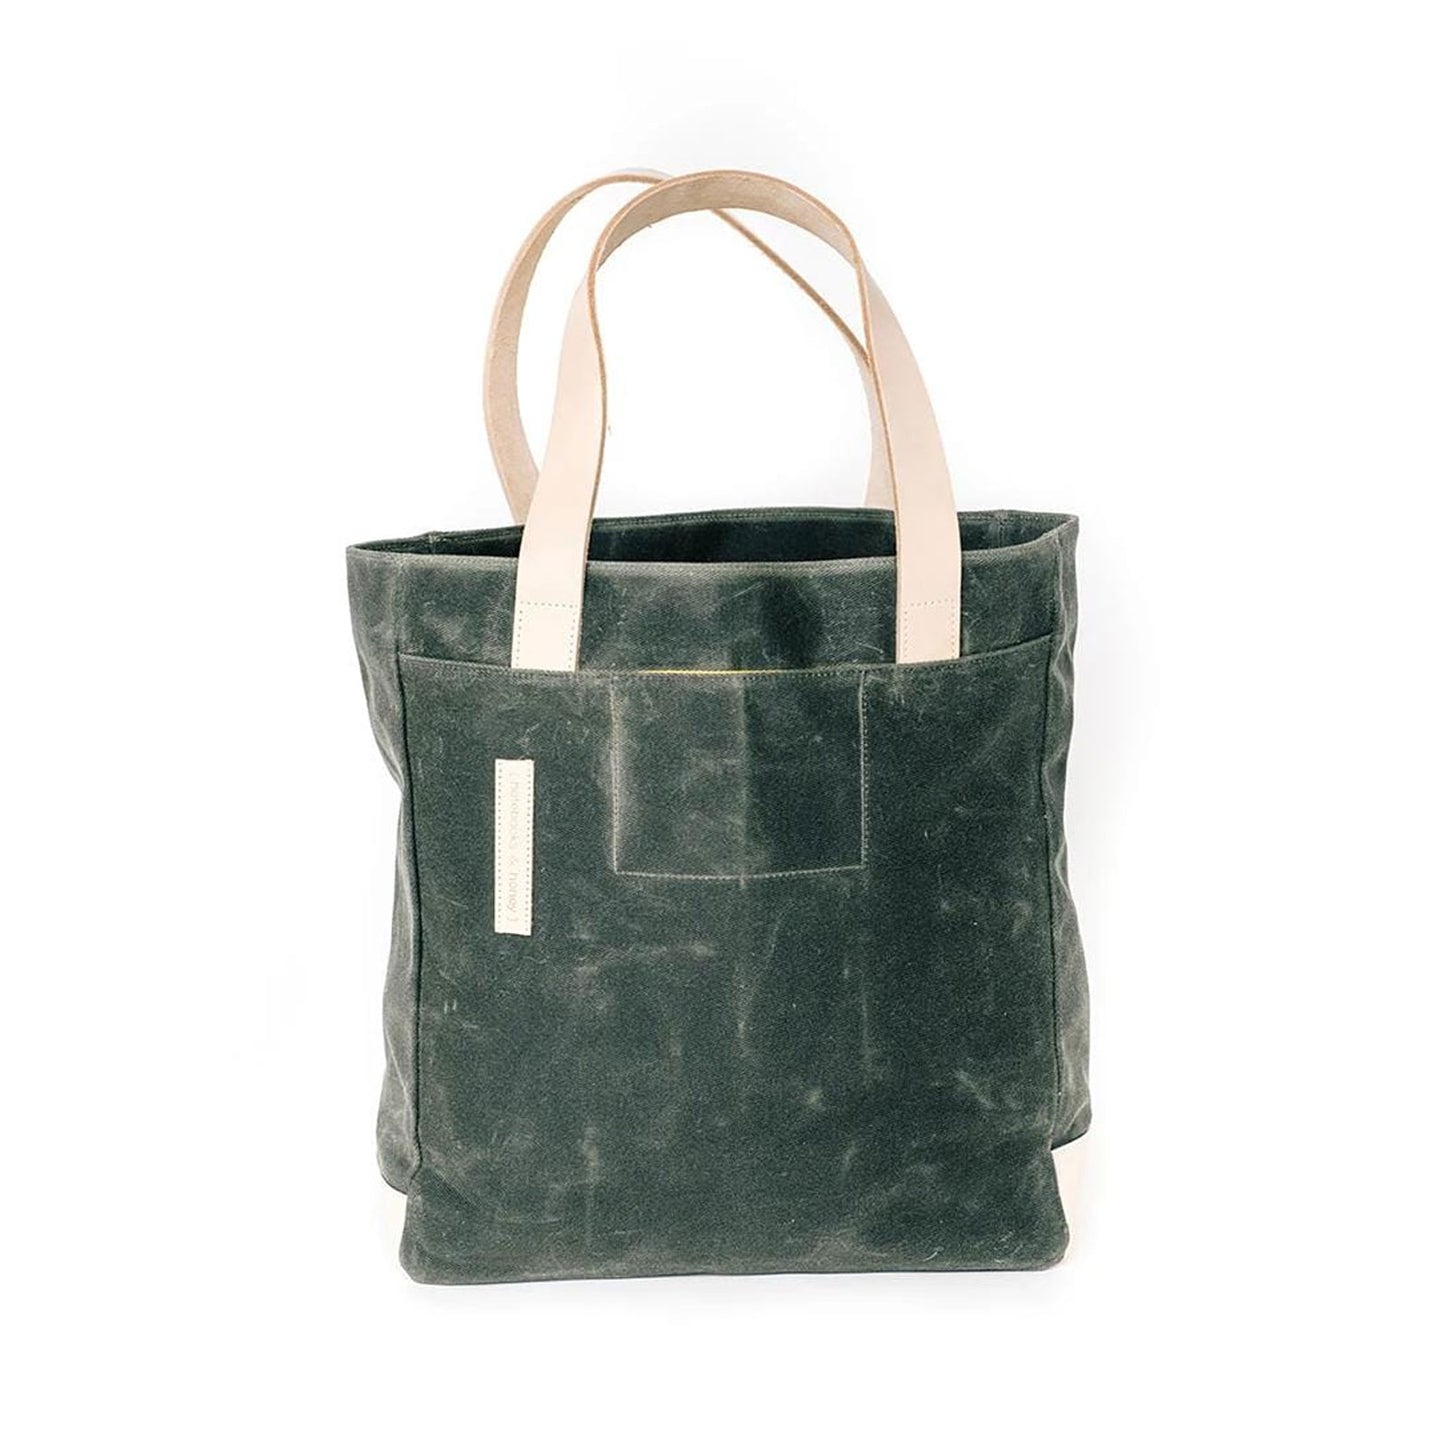 The Wild One Canvas Bag, Olive